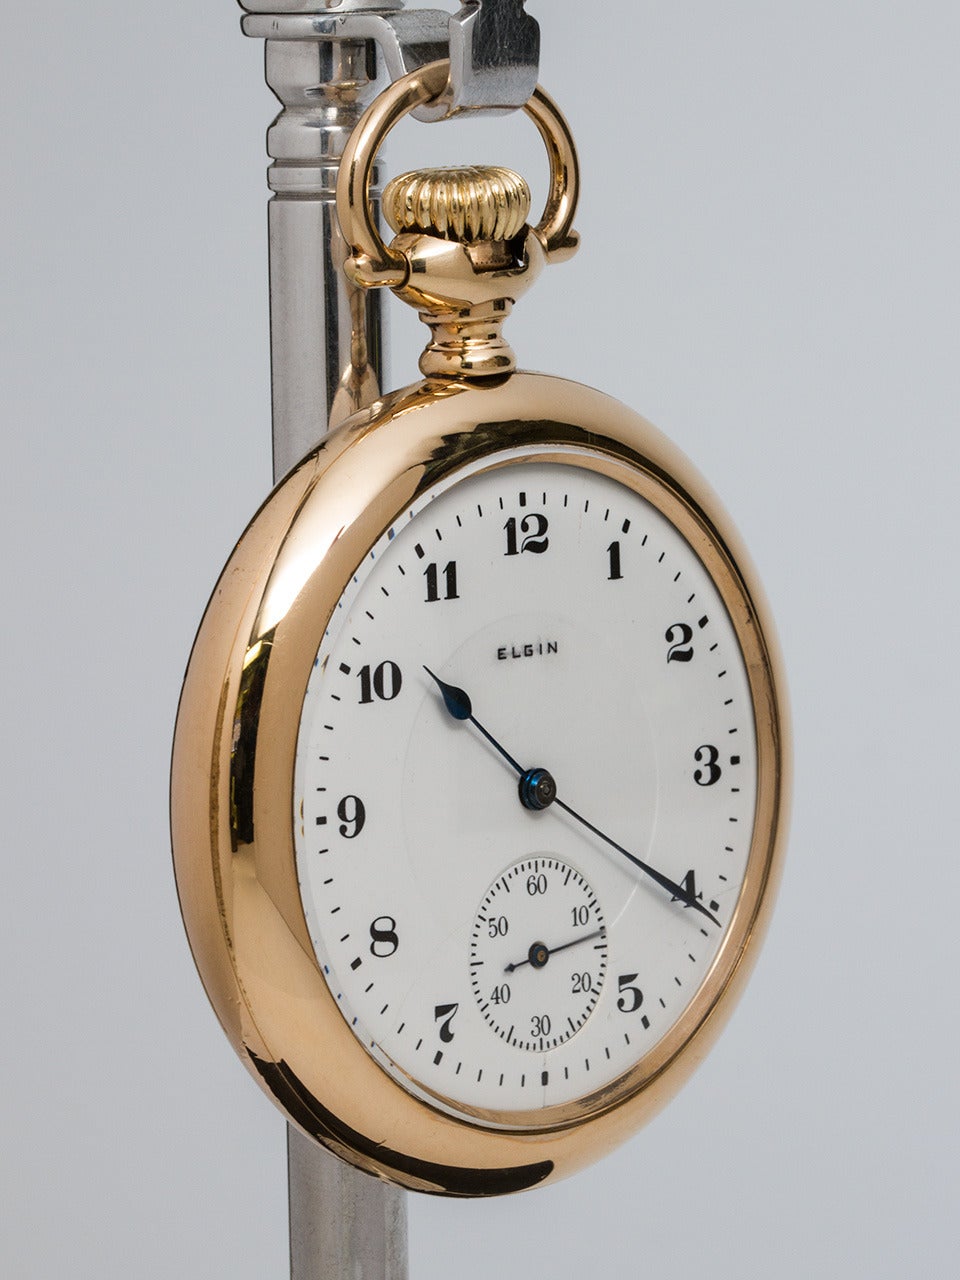 Elgin Yellow Gold Filled 16-S Open Face Railroad style pocket watch circa 1920's. Featuring white enamel dial, arabic indexes, and blued steel hands. Powered by 17 jewel manual wind movement with subsidiary seconds. Stem wind and stem set. Heavy